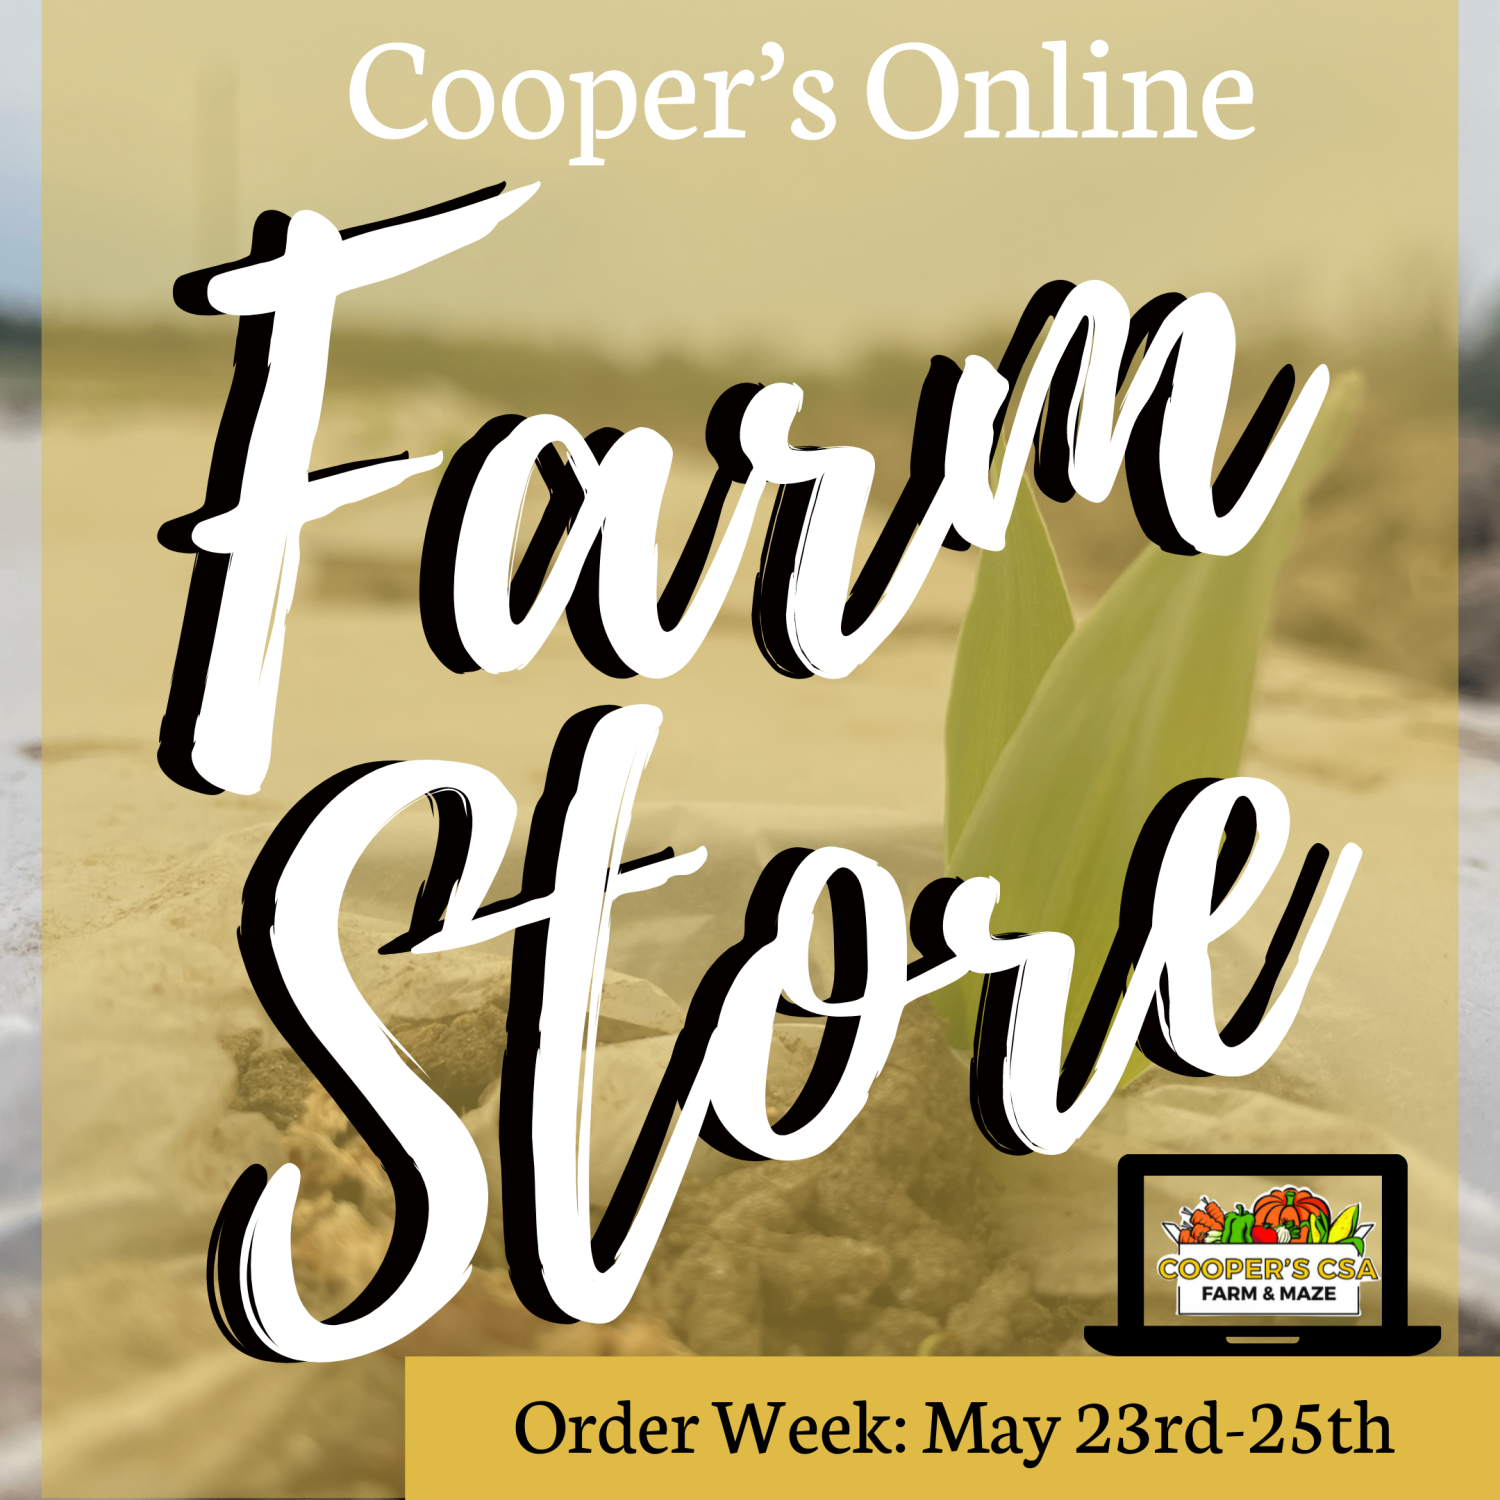 Next Happening: Coopers CSA Online FarmStore- Order Week May 23rd-25th